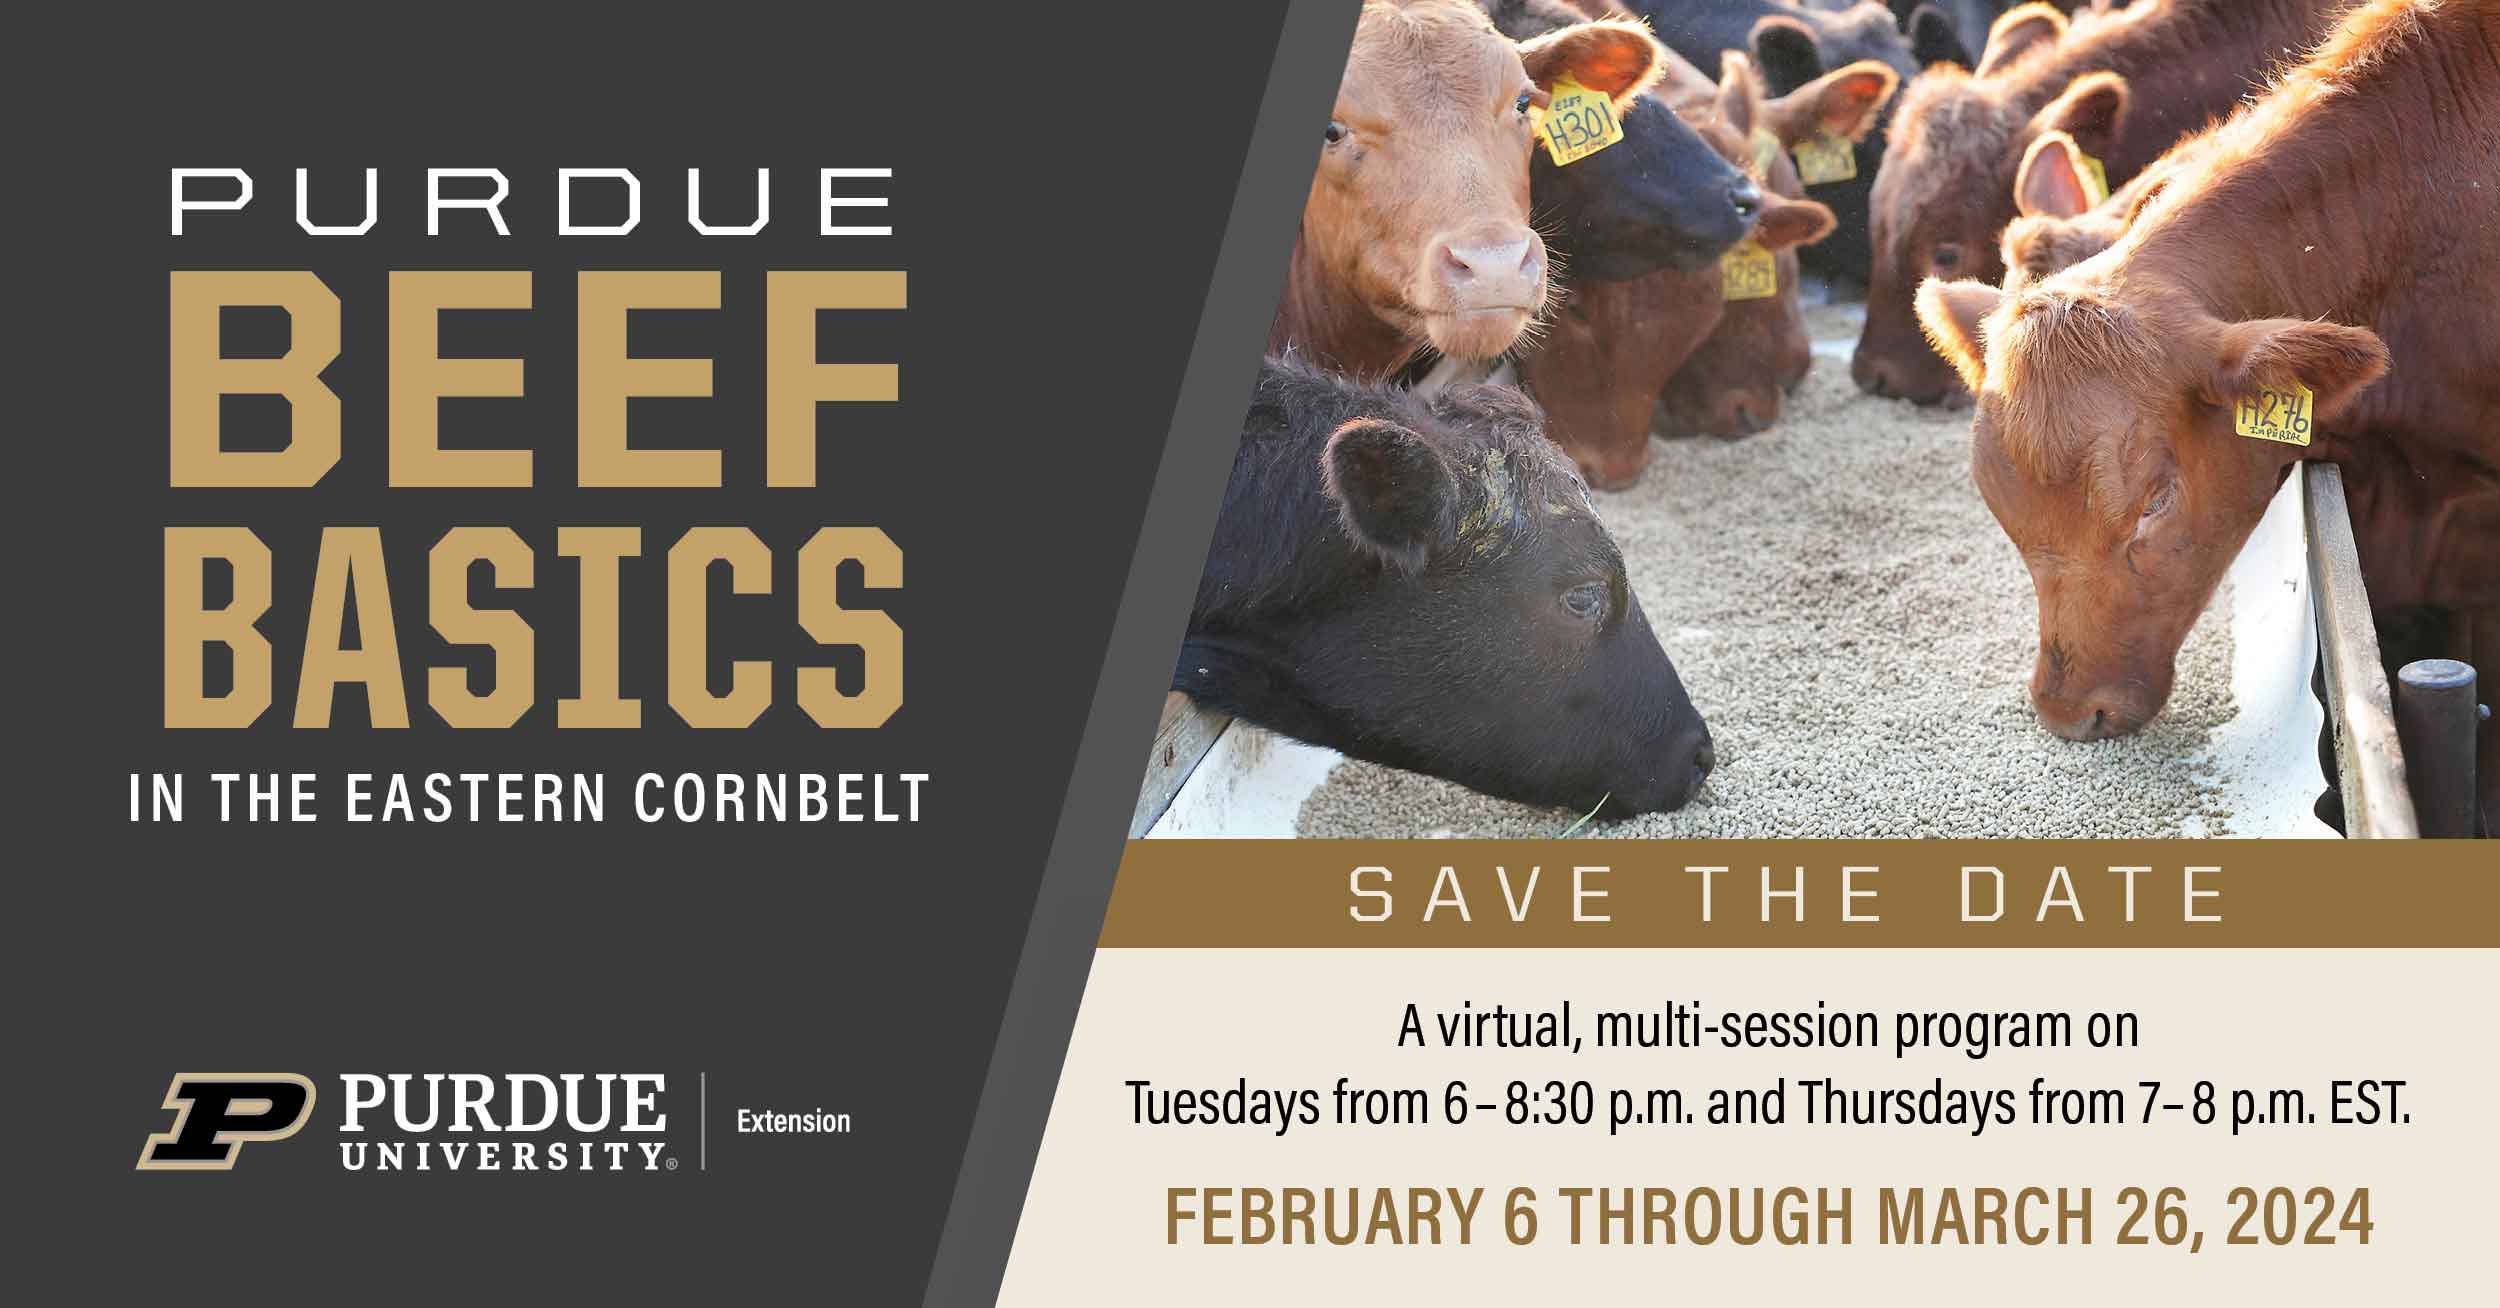 beef cattle eating grain in the middle with Purdue Beef Basics in the Eastern Corn Belt on the left and Save the Date Purdue University Extension on the right